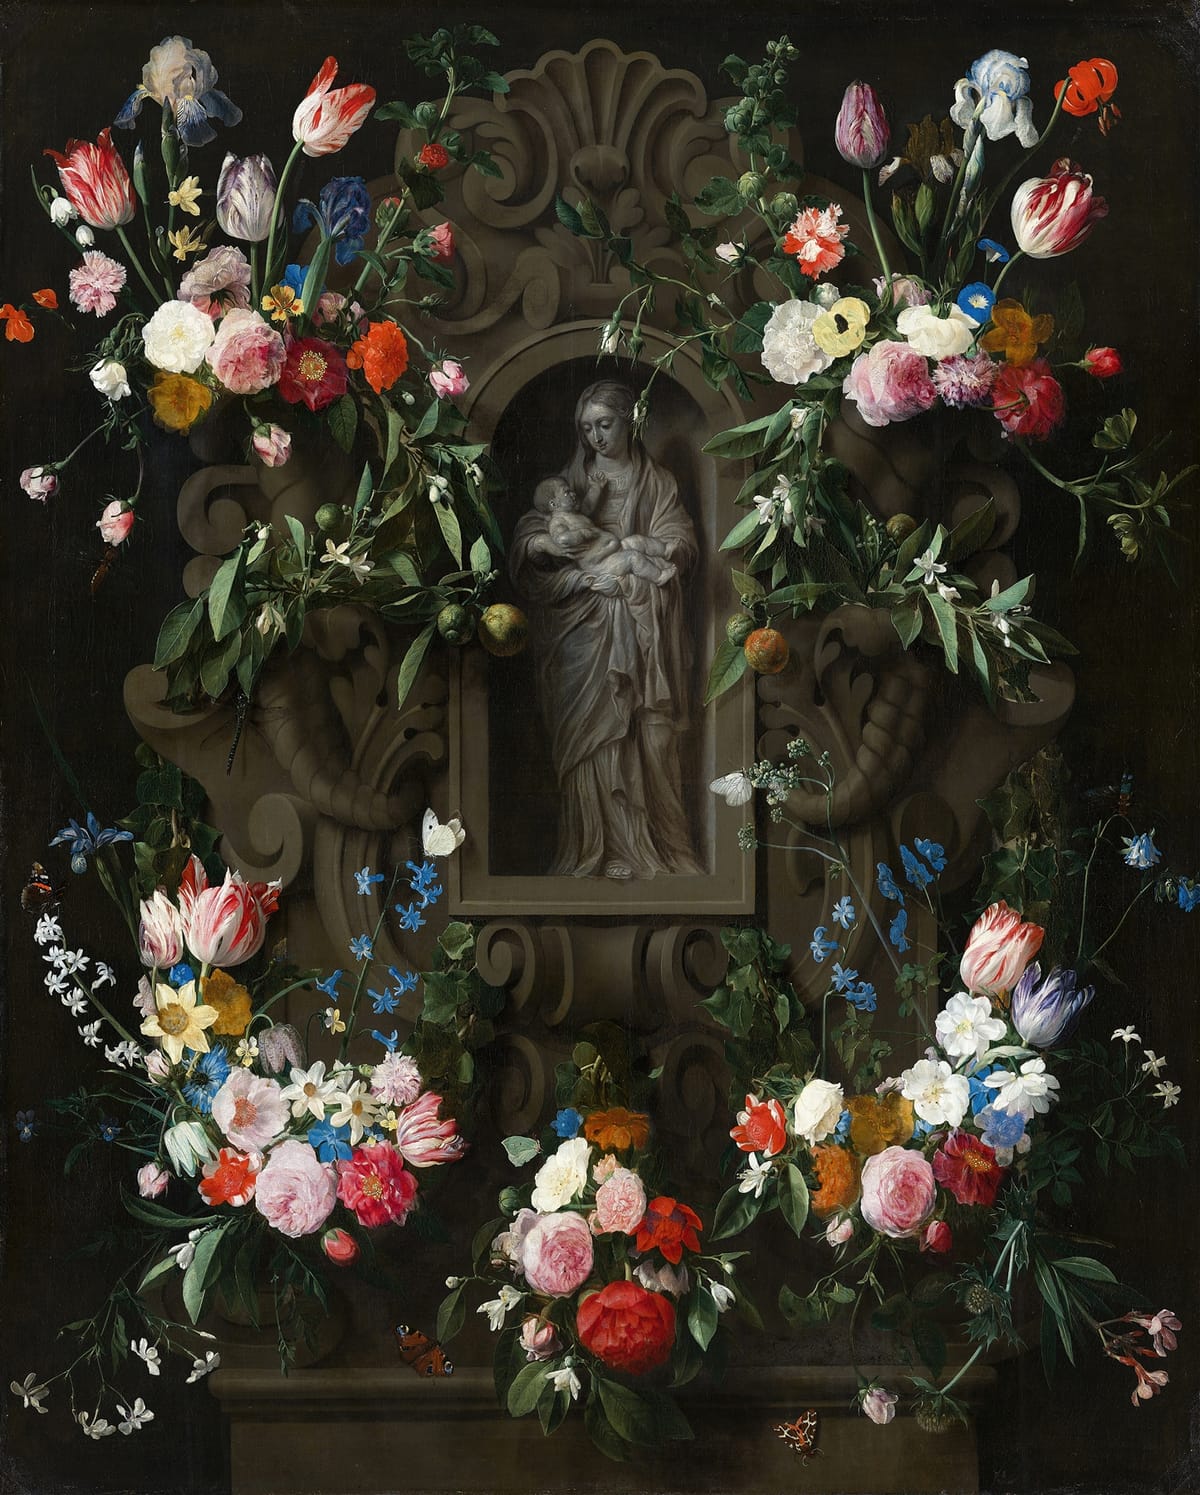 Garland of Flowers surrounding a Sculpture of the Virgin Mary  by Daniel Seghers (Flemish, 1645) - Public Domain Catholic Painting